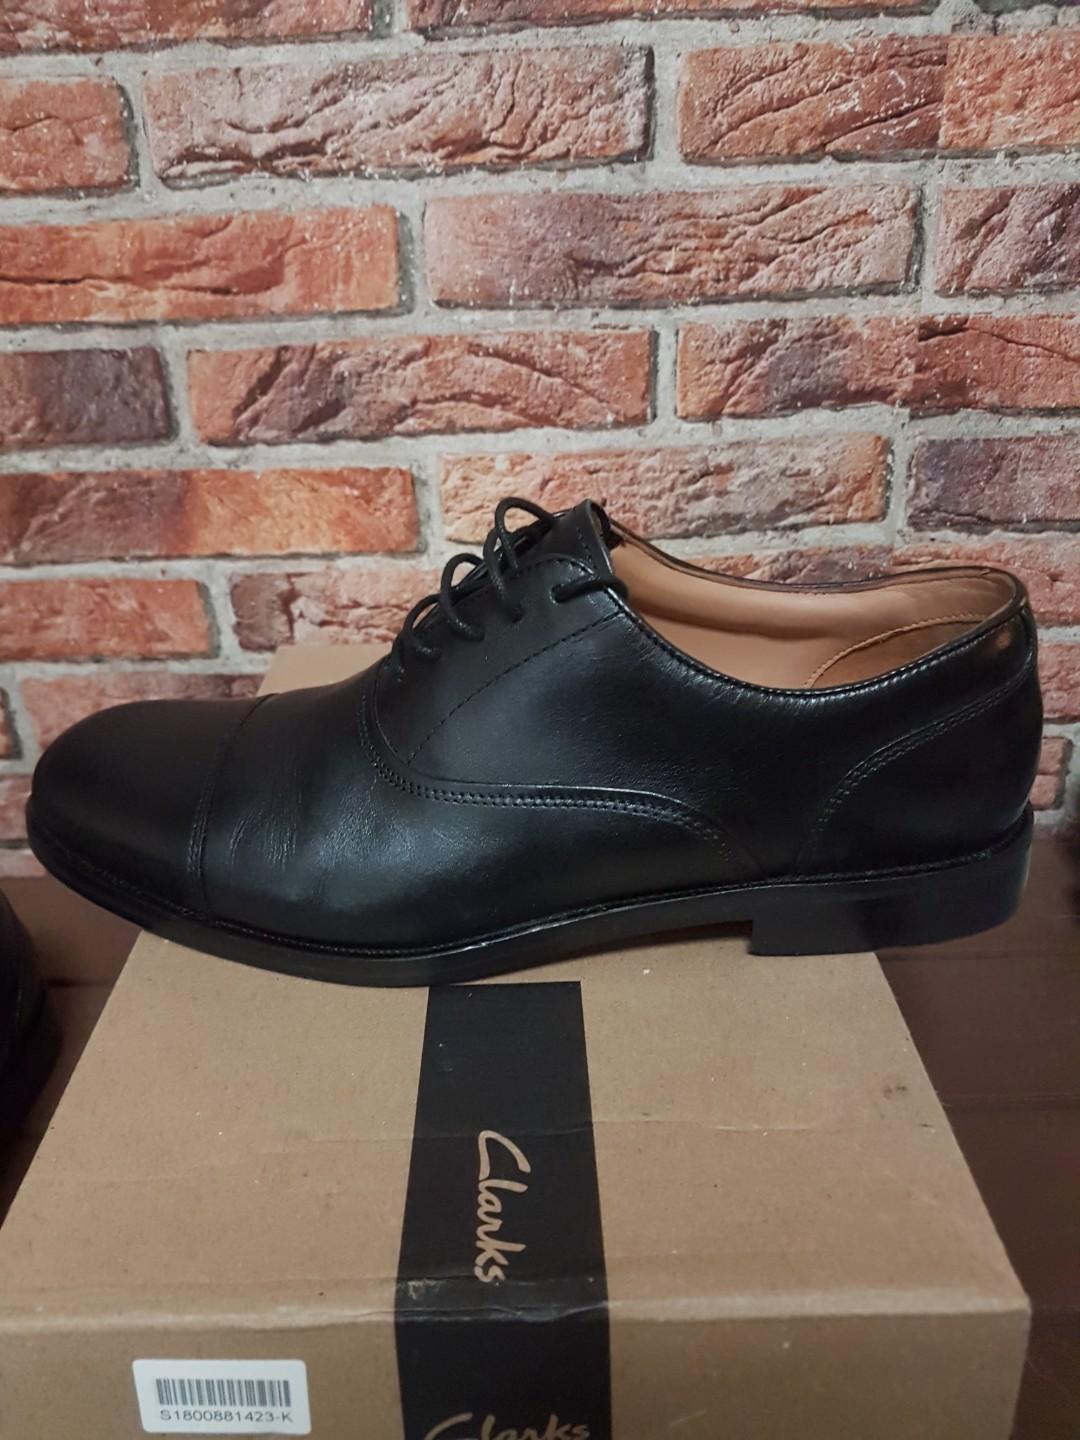 coling boss clarks